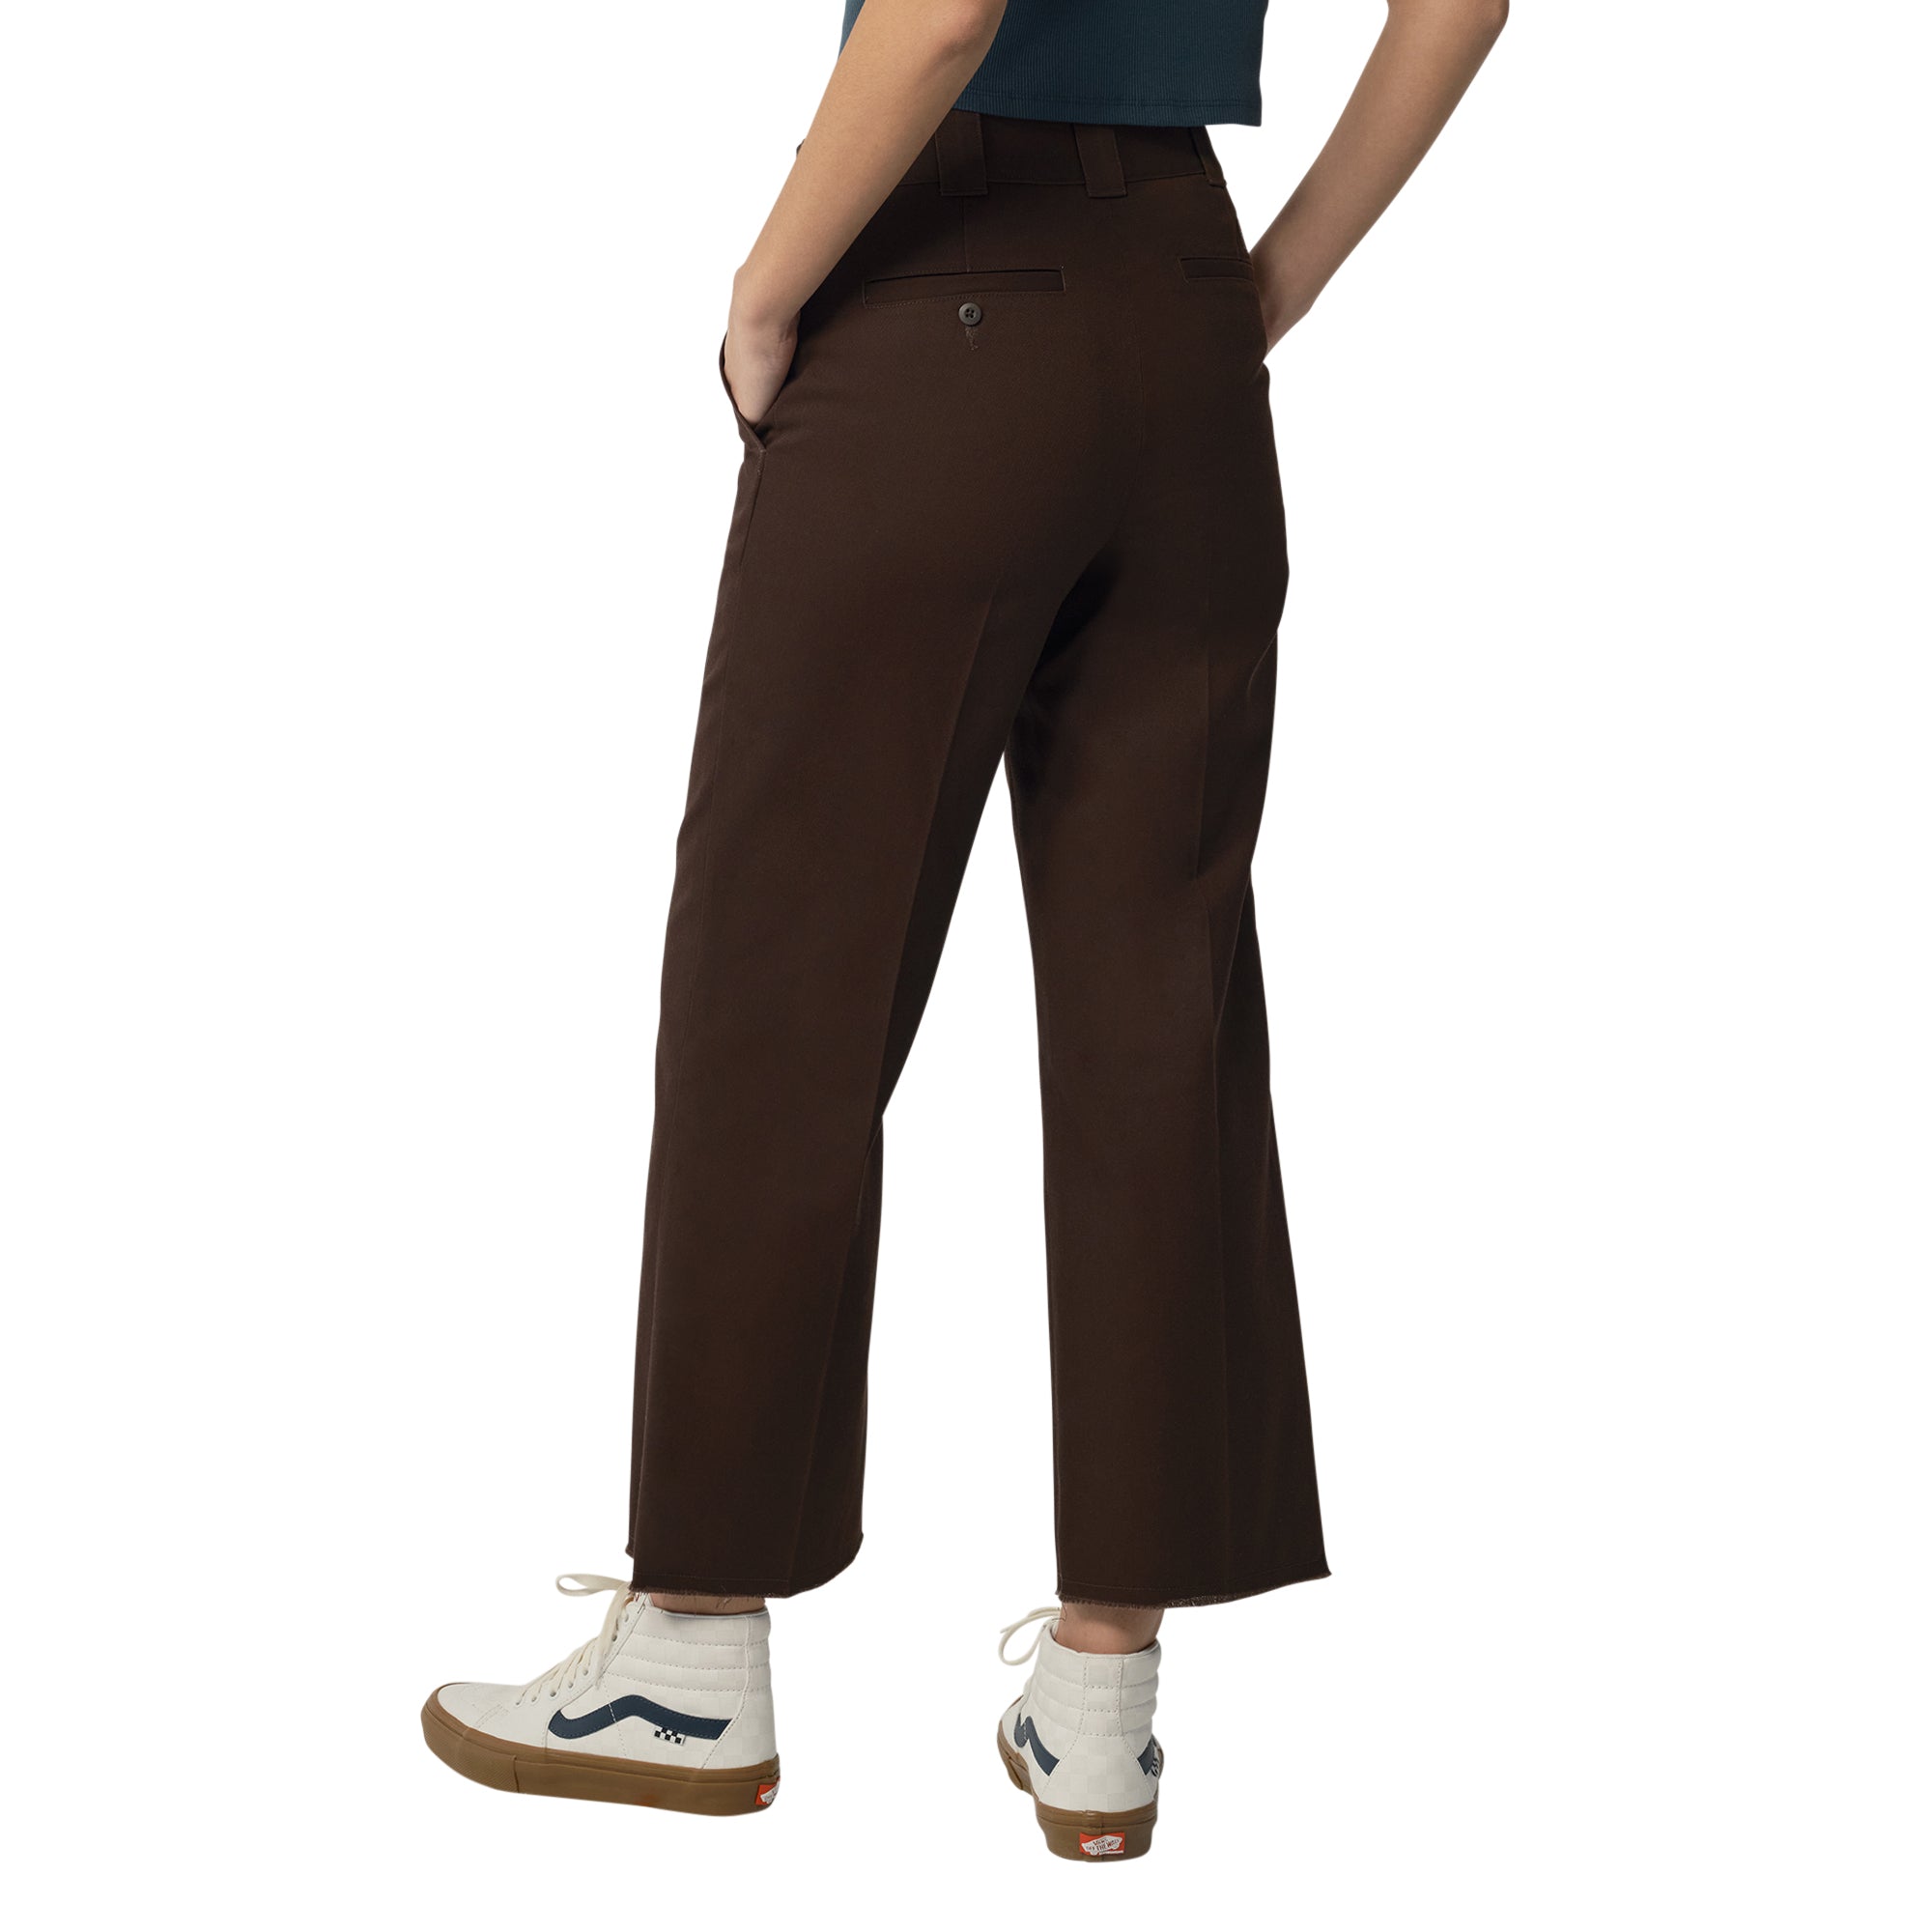 Twill Cropped Pants - Rinsed Chocolate Brown